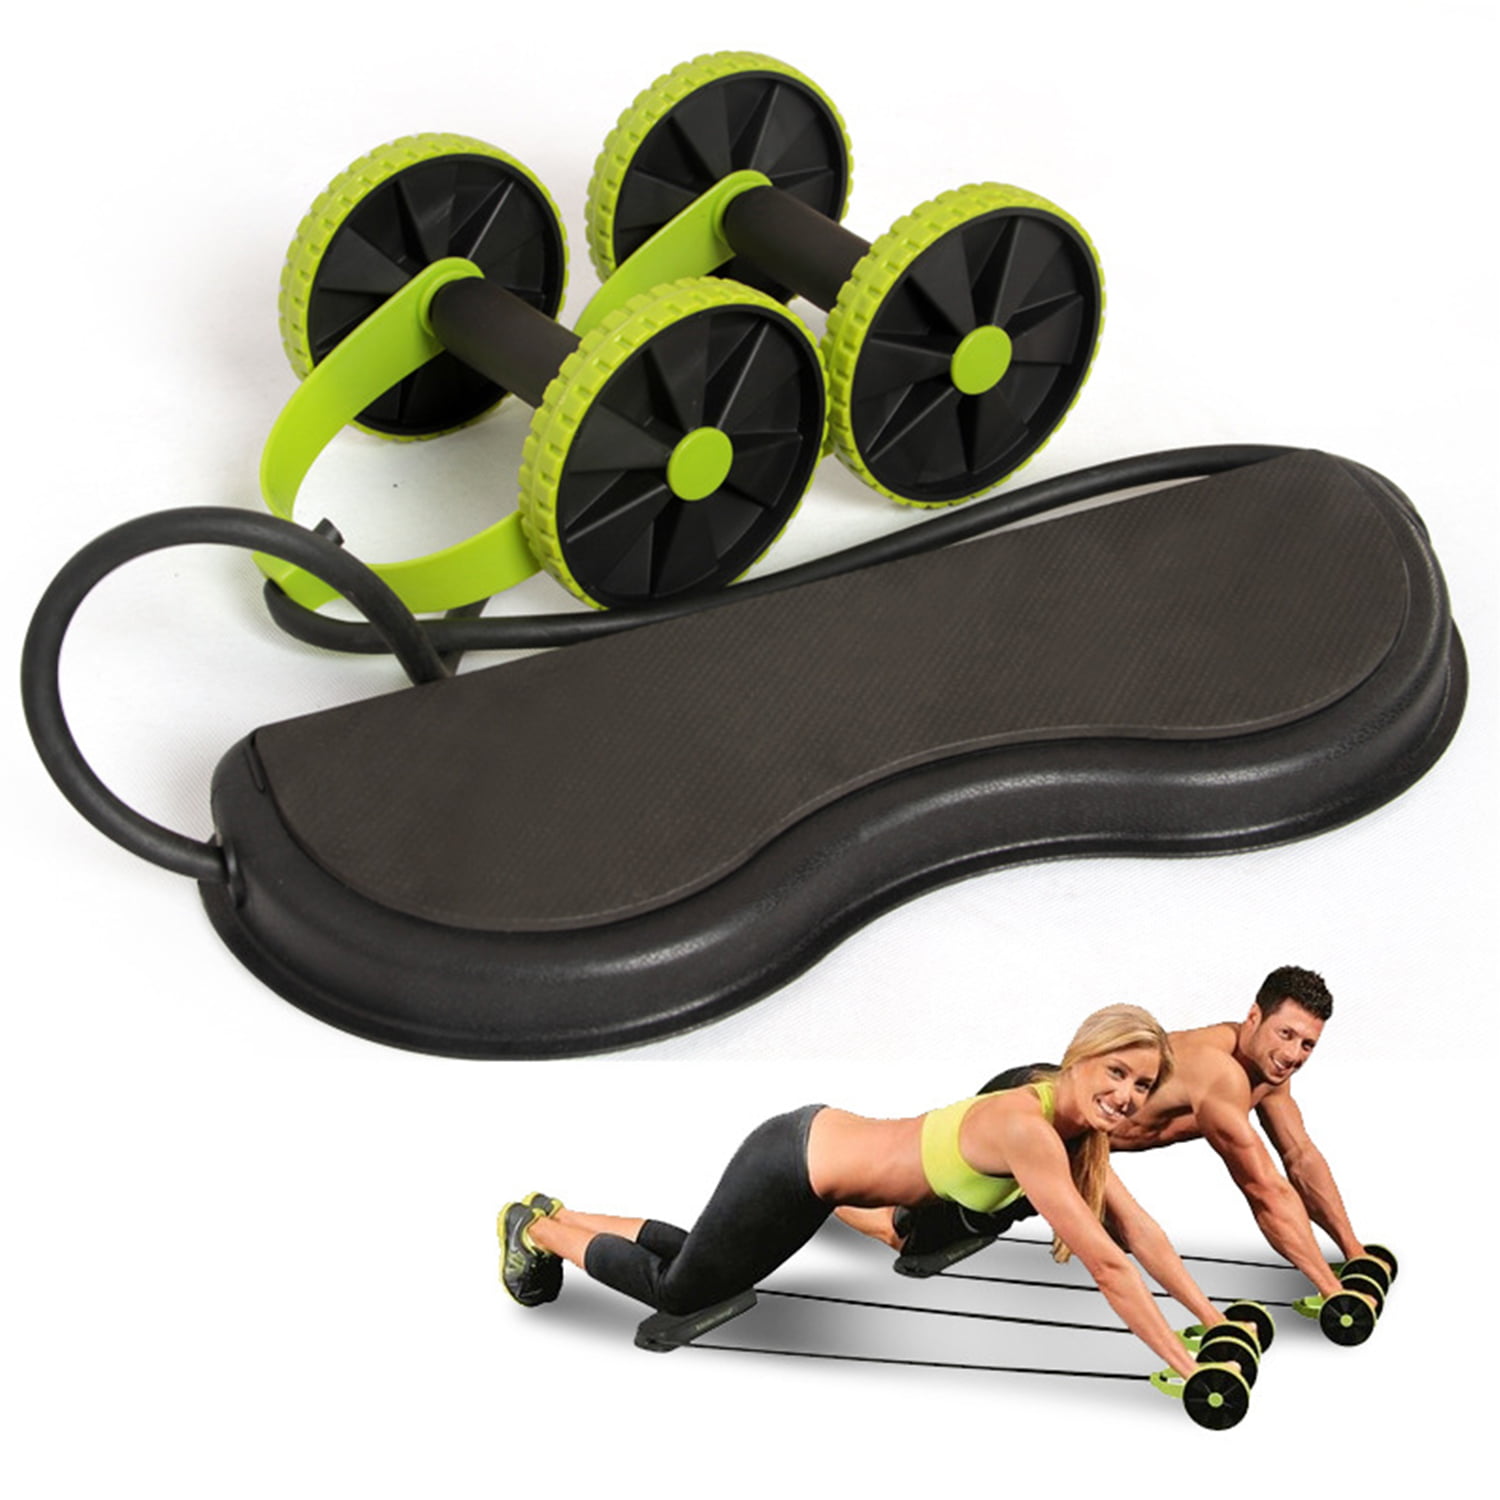 Trim and Tone Abdominal Exercise Roller Wheel with Comfortable Grips Body Fitness Strength Training Gym Machine Tool